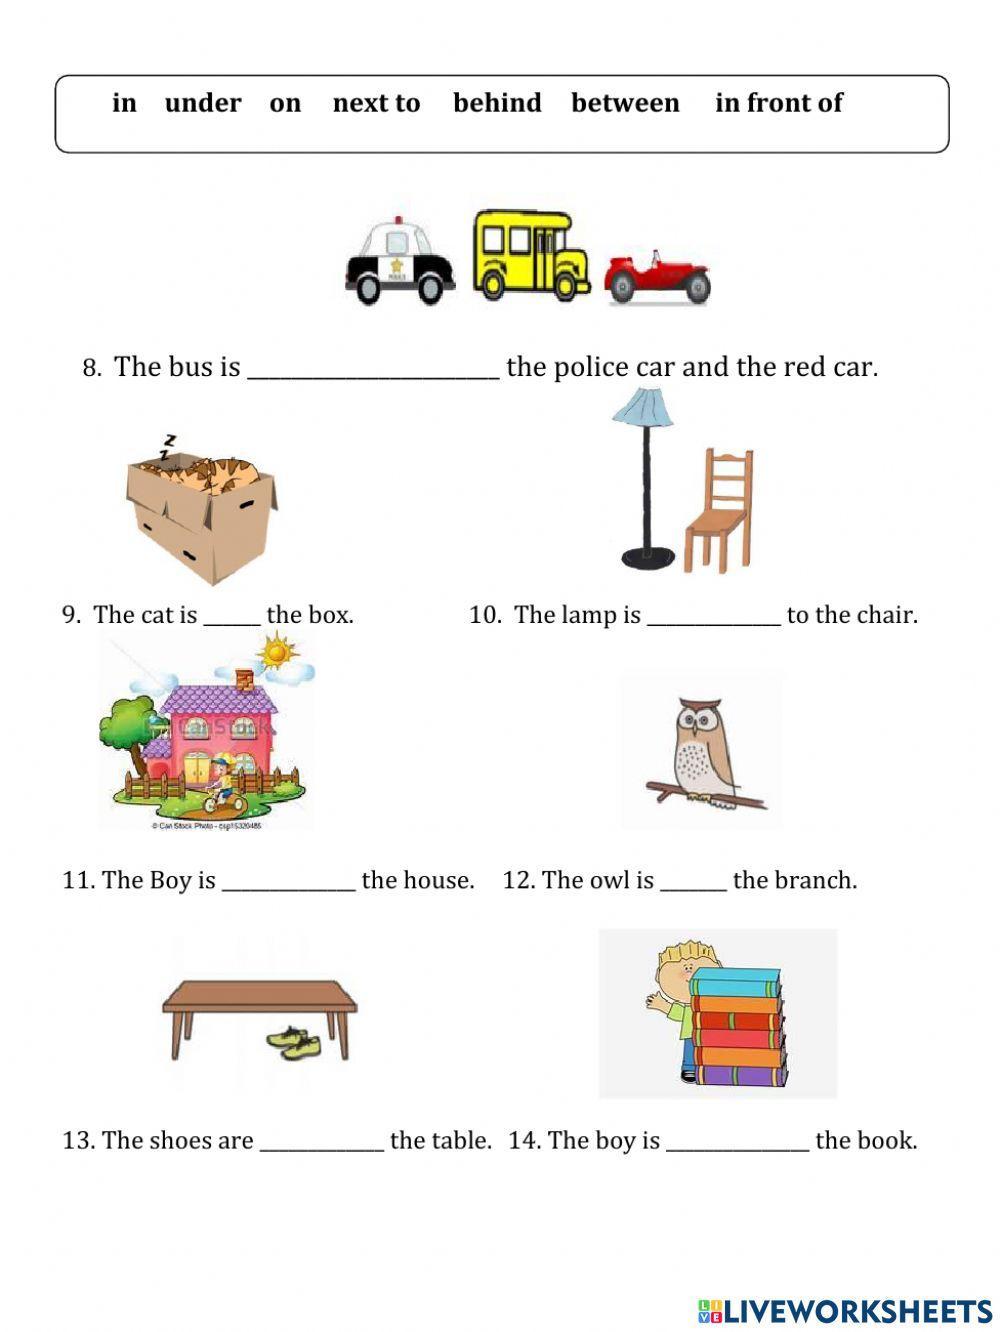 Position and Movement - Year 1 worksheet | Live Worksheets